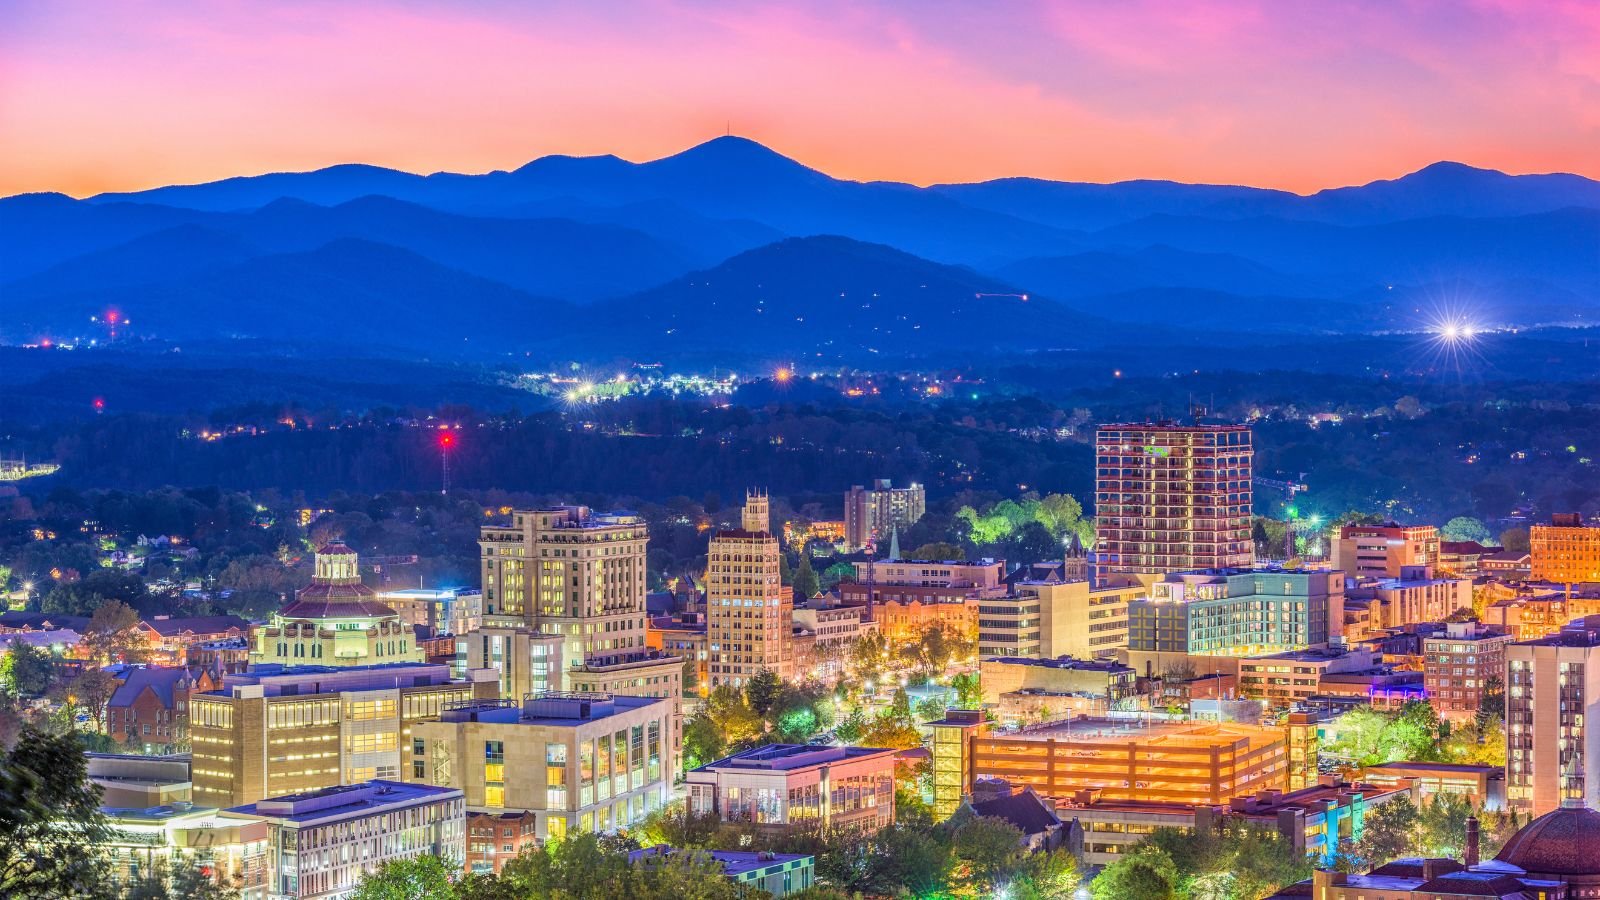 <p>The Blue Ridge Mountains nestle Asheville. Seniors love the historic Biltmore Estate. It has a lively arts scene, gourmet restaurants, and funky galleries. The clean mountain air is therapeutic.</p>